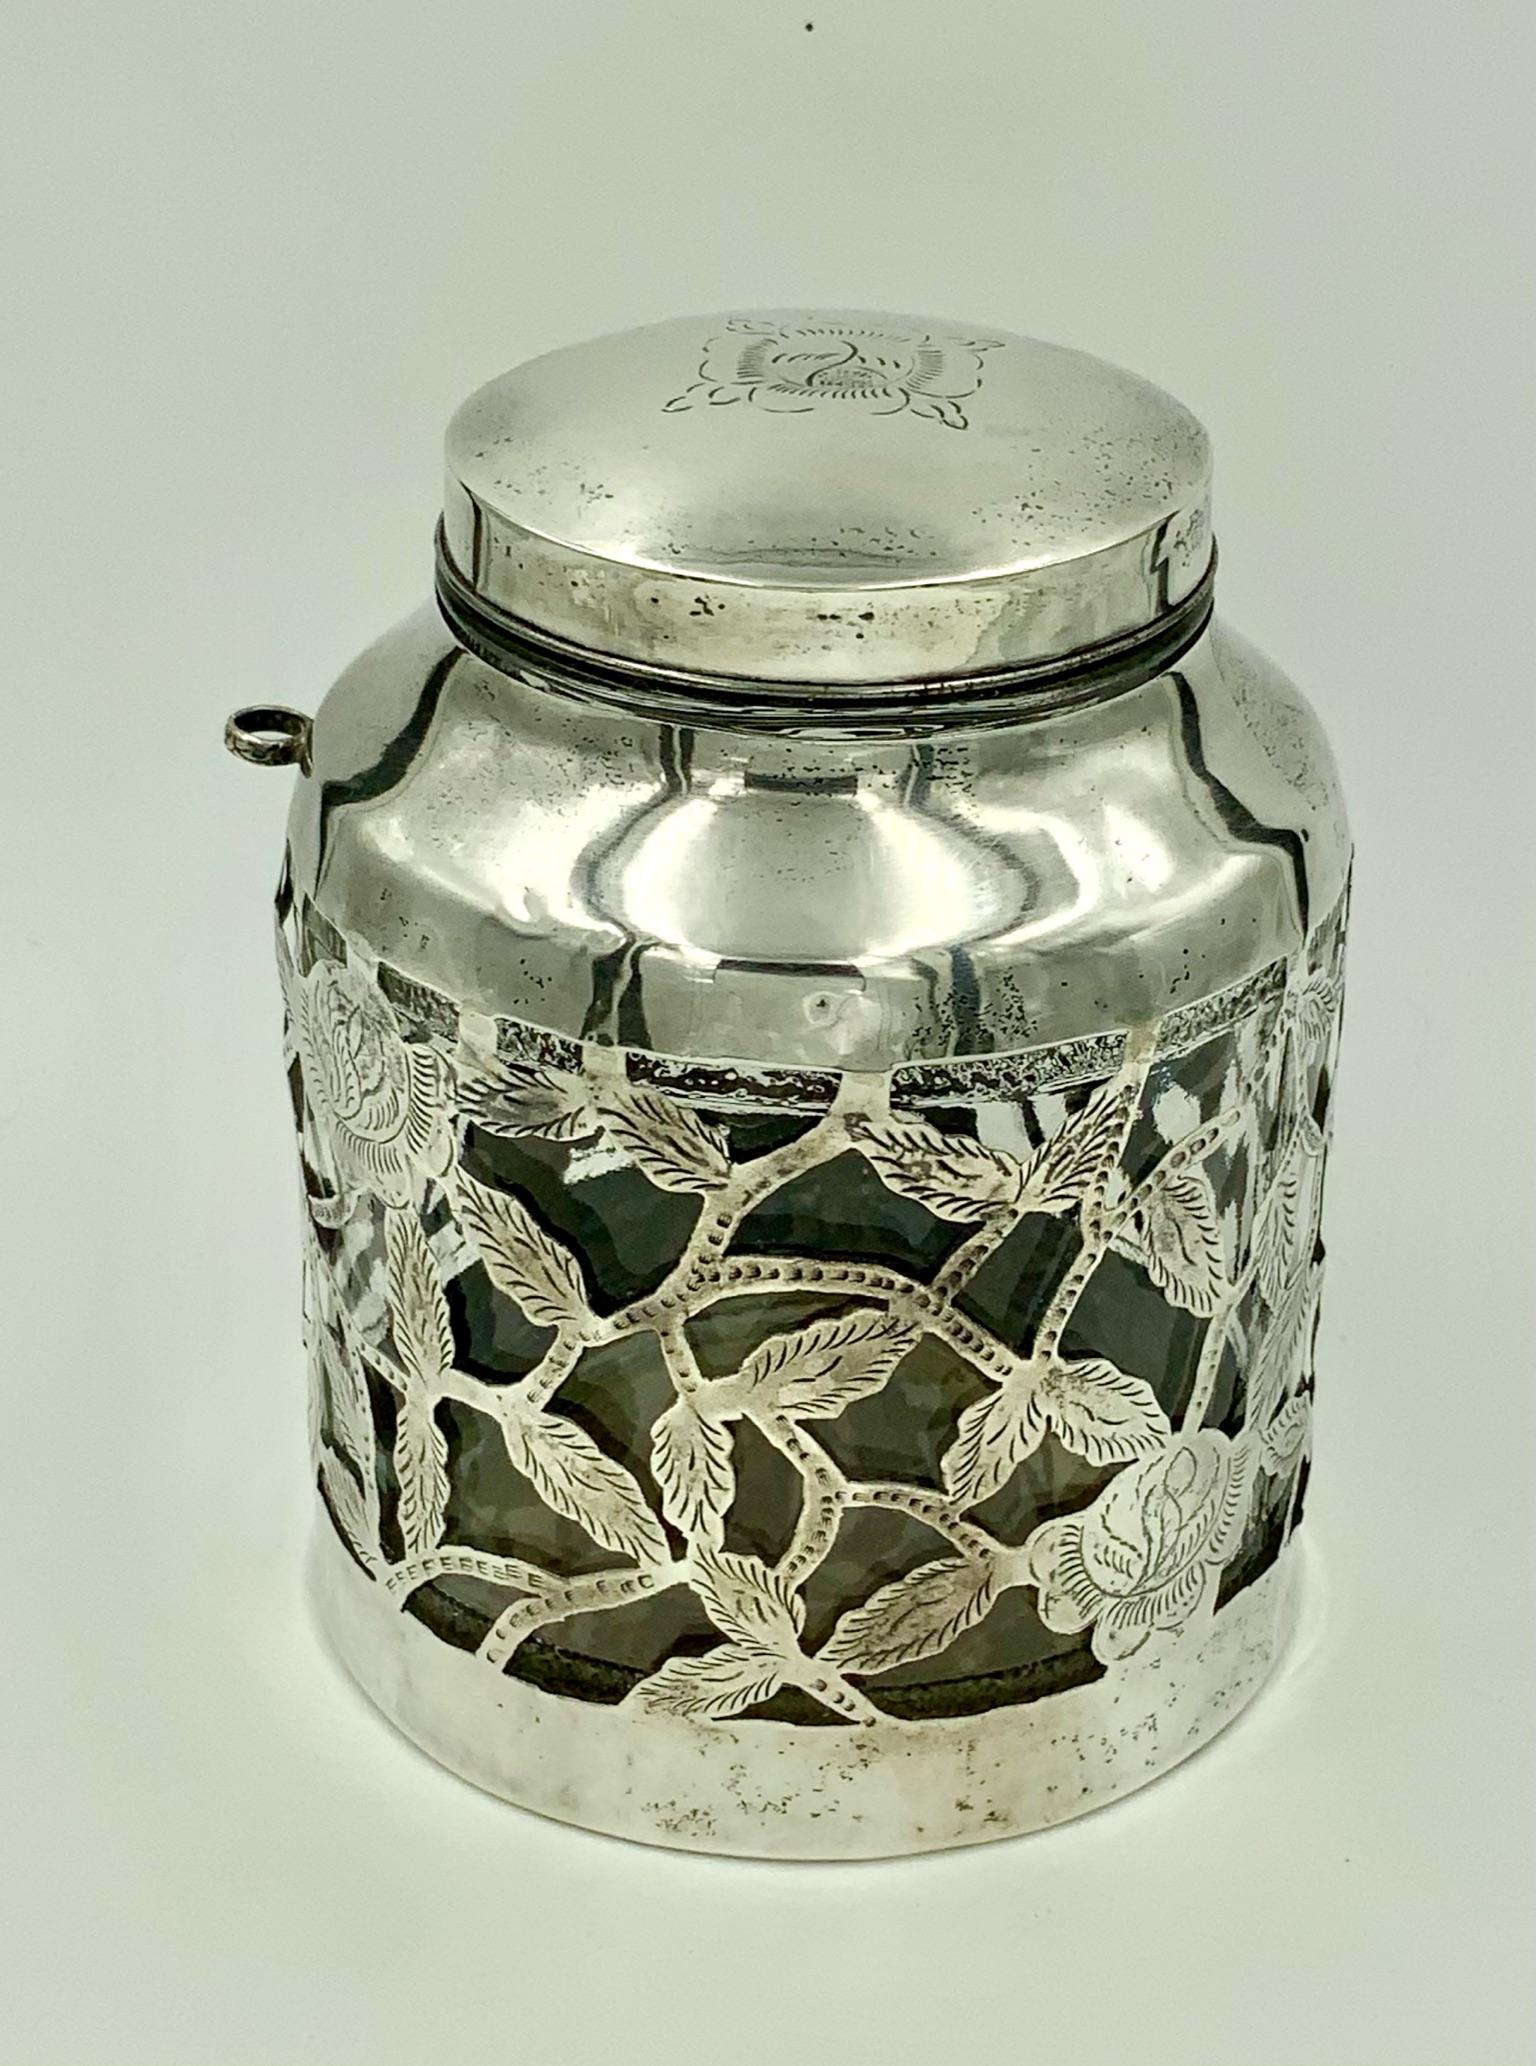 Vintage Mexican etched floral sterling overlay glass jar with spoon holder. This wonderful jar was produced in Mexico and feature a wonderful sterling overlay sleeve with an engraved floral design. The sleeves encases a glass jar. The piece has an